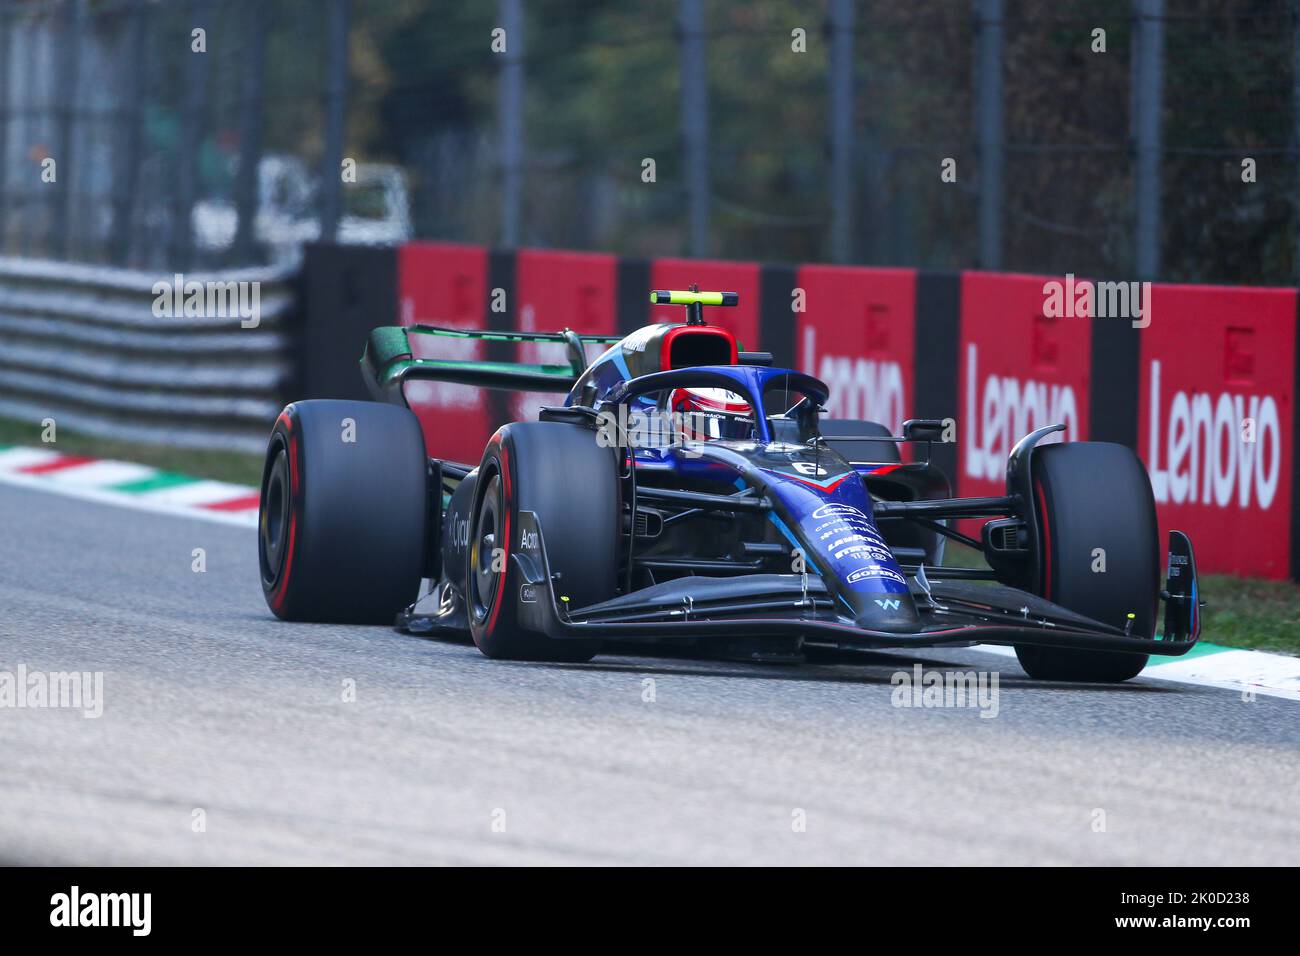 Free practice and qualifying, Formula 1 Championship in Monza, Italy, September 10 2022 Credit Independent Photo Agency/Alamy Live News